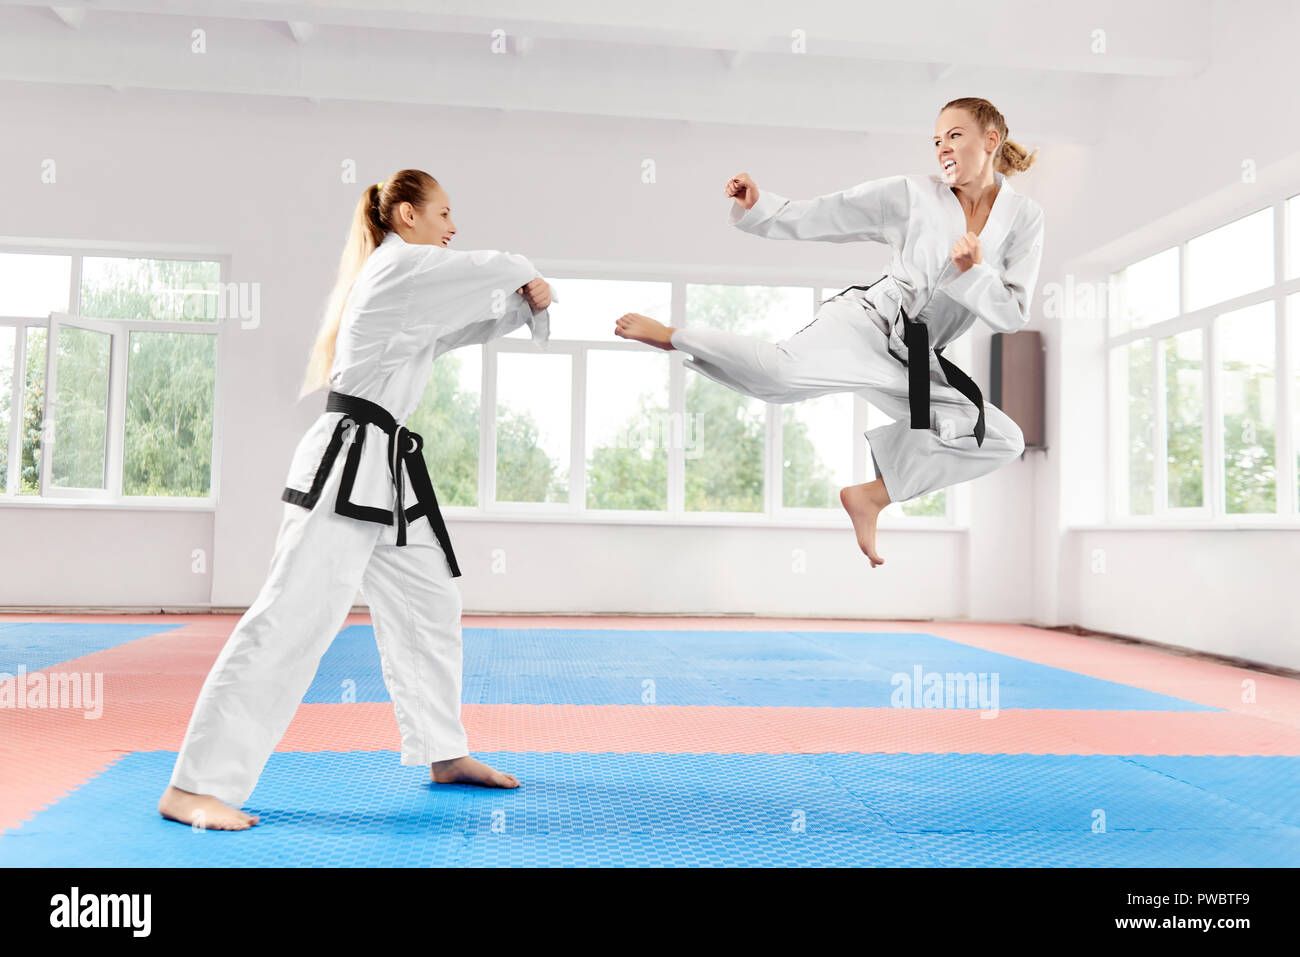 Two young women wearing in white kimono and black belt training karate martial arts against big window. One strong female fighter jumping and performing kick to other girl who making block of strike. Stock Photo